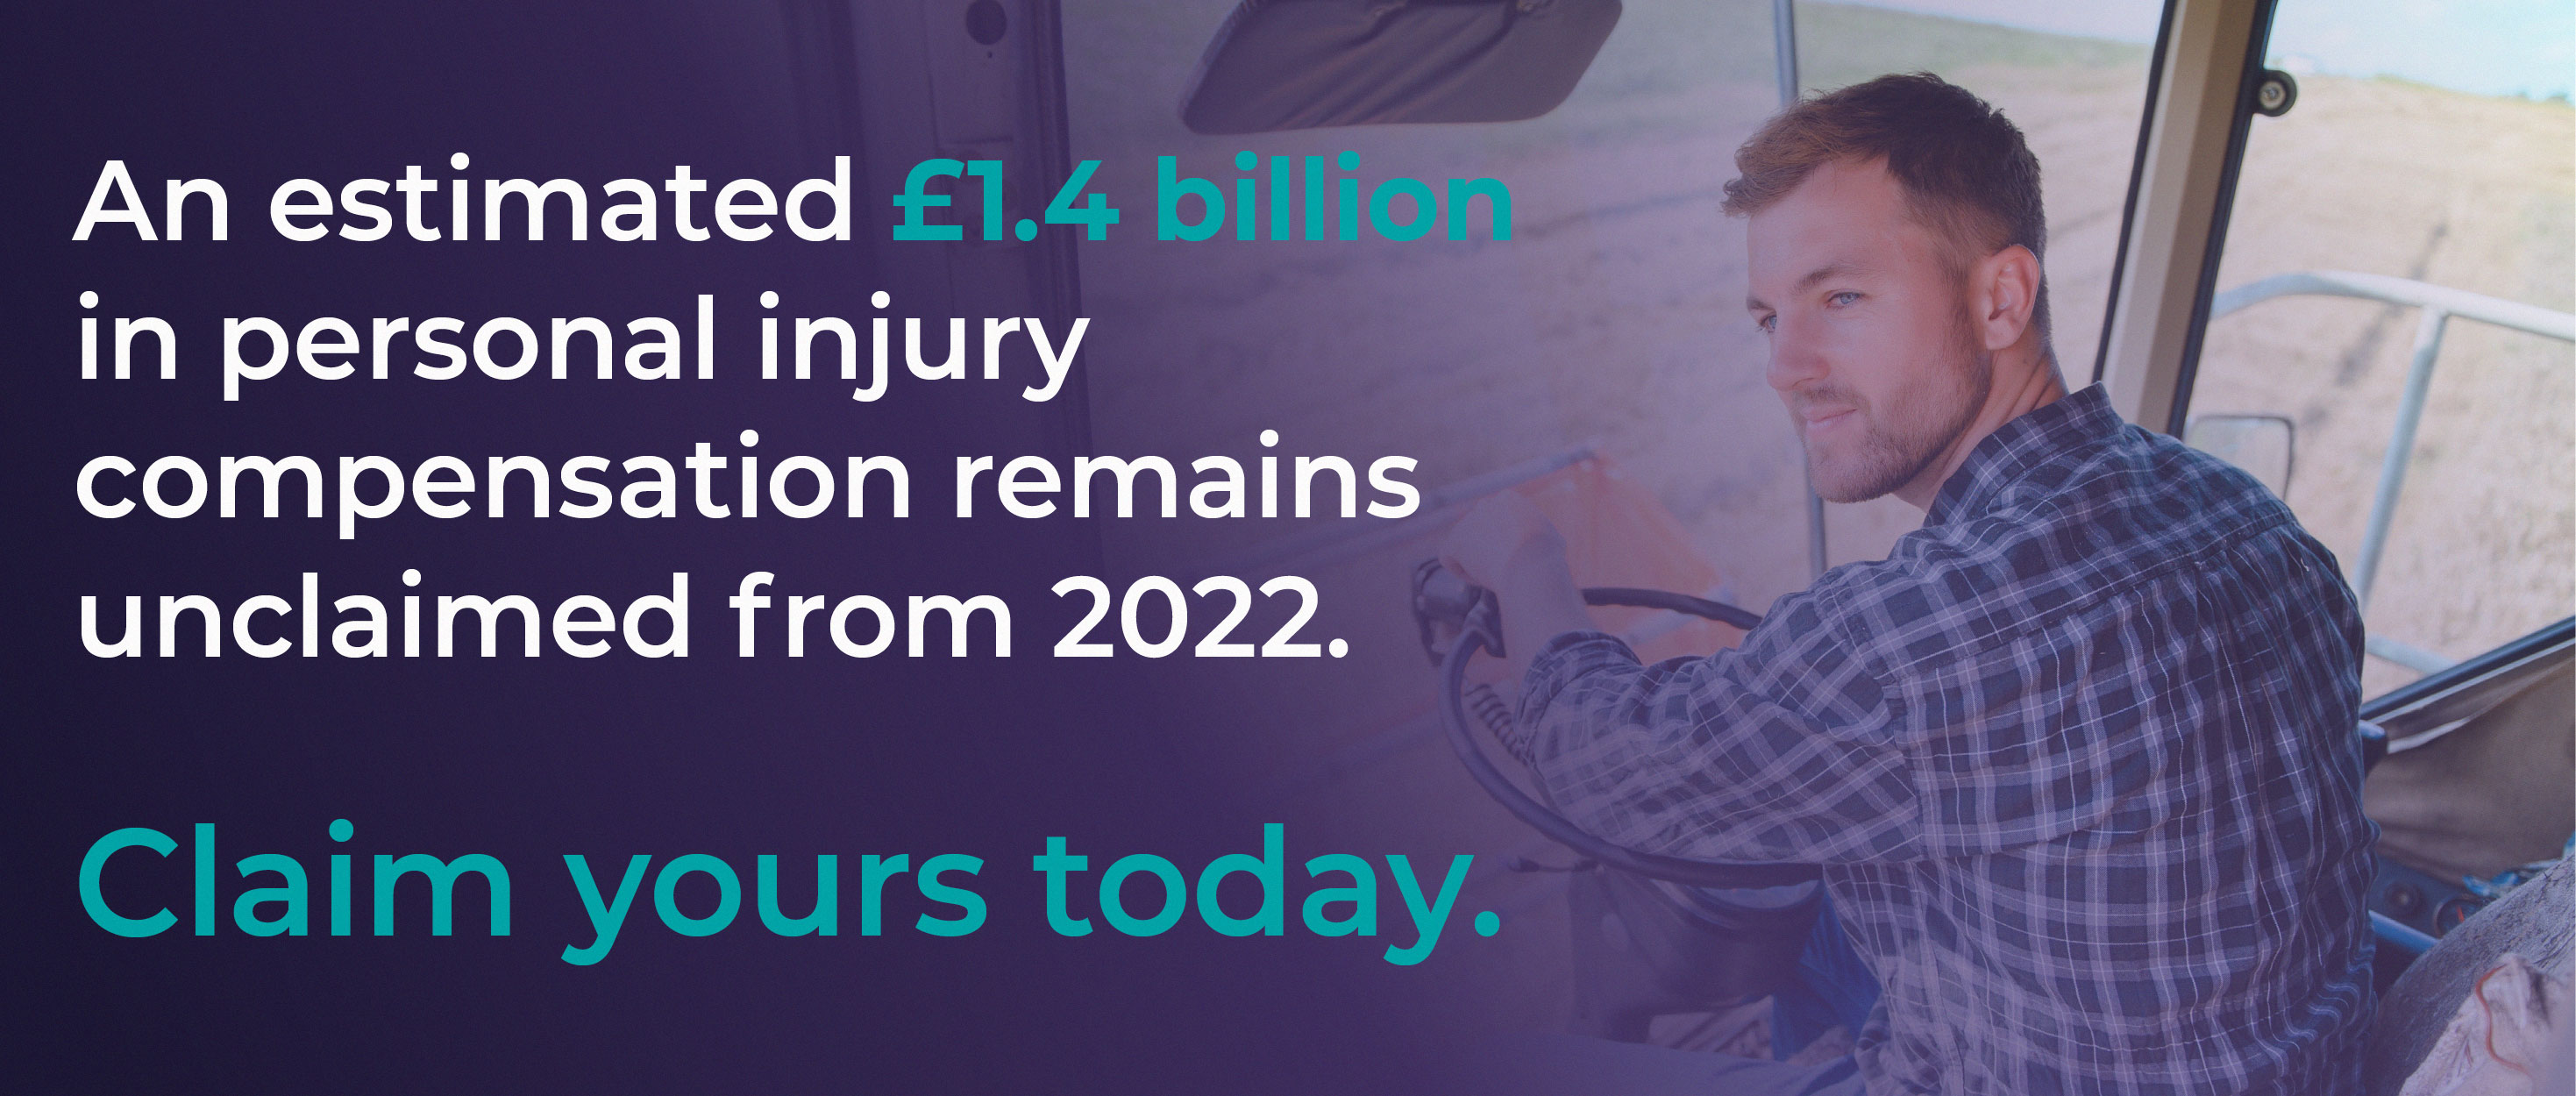 Personal injury compensation. Claim yours today.